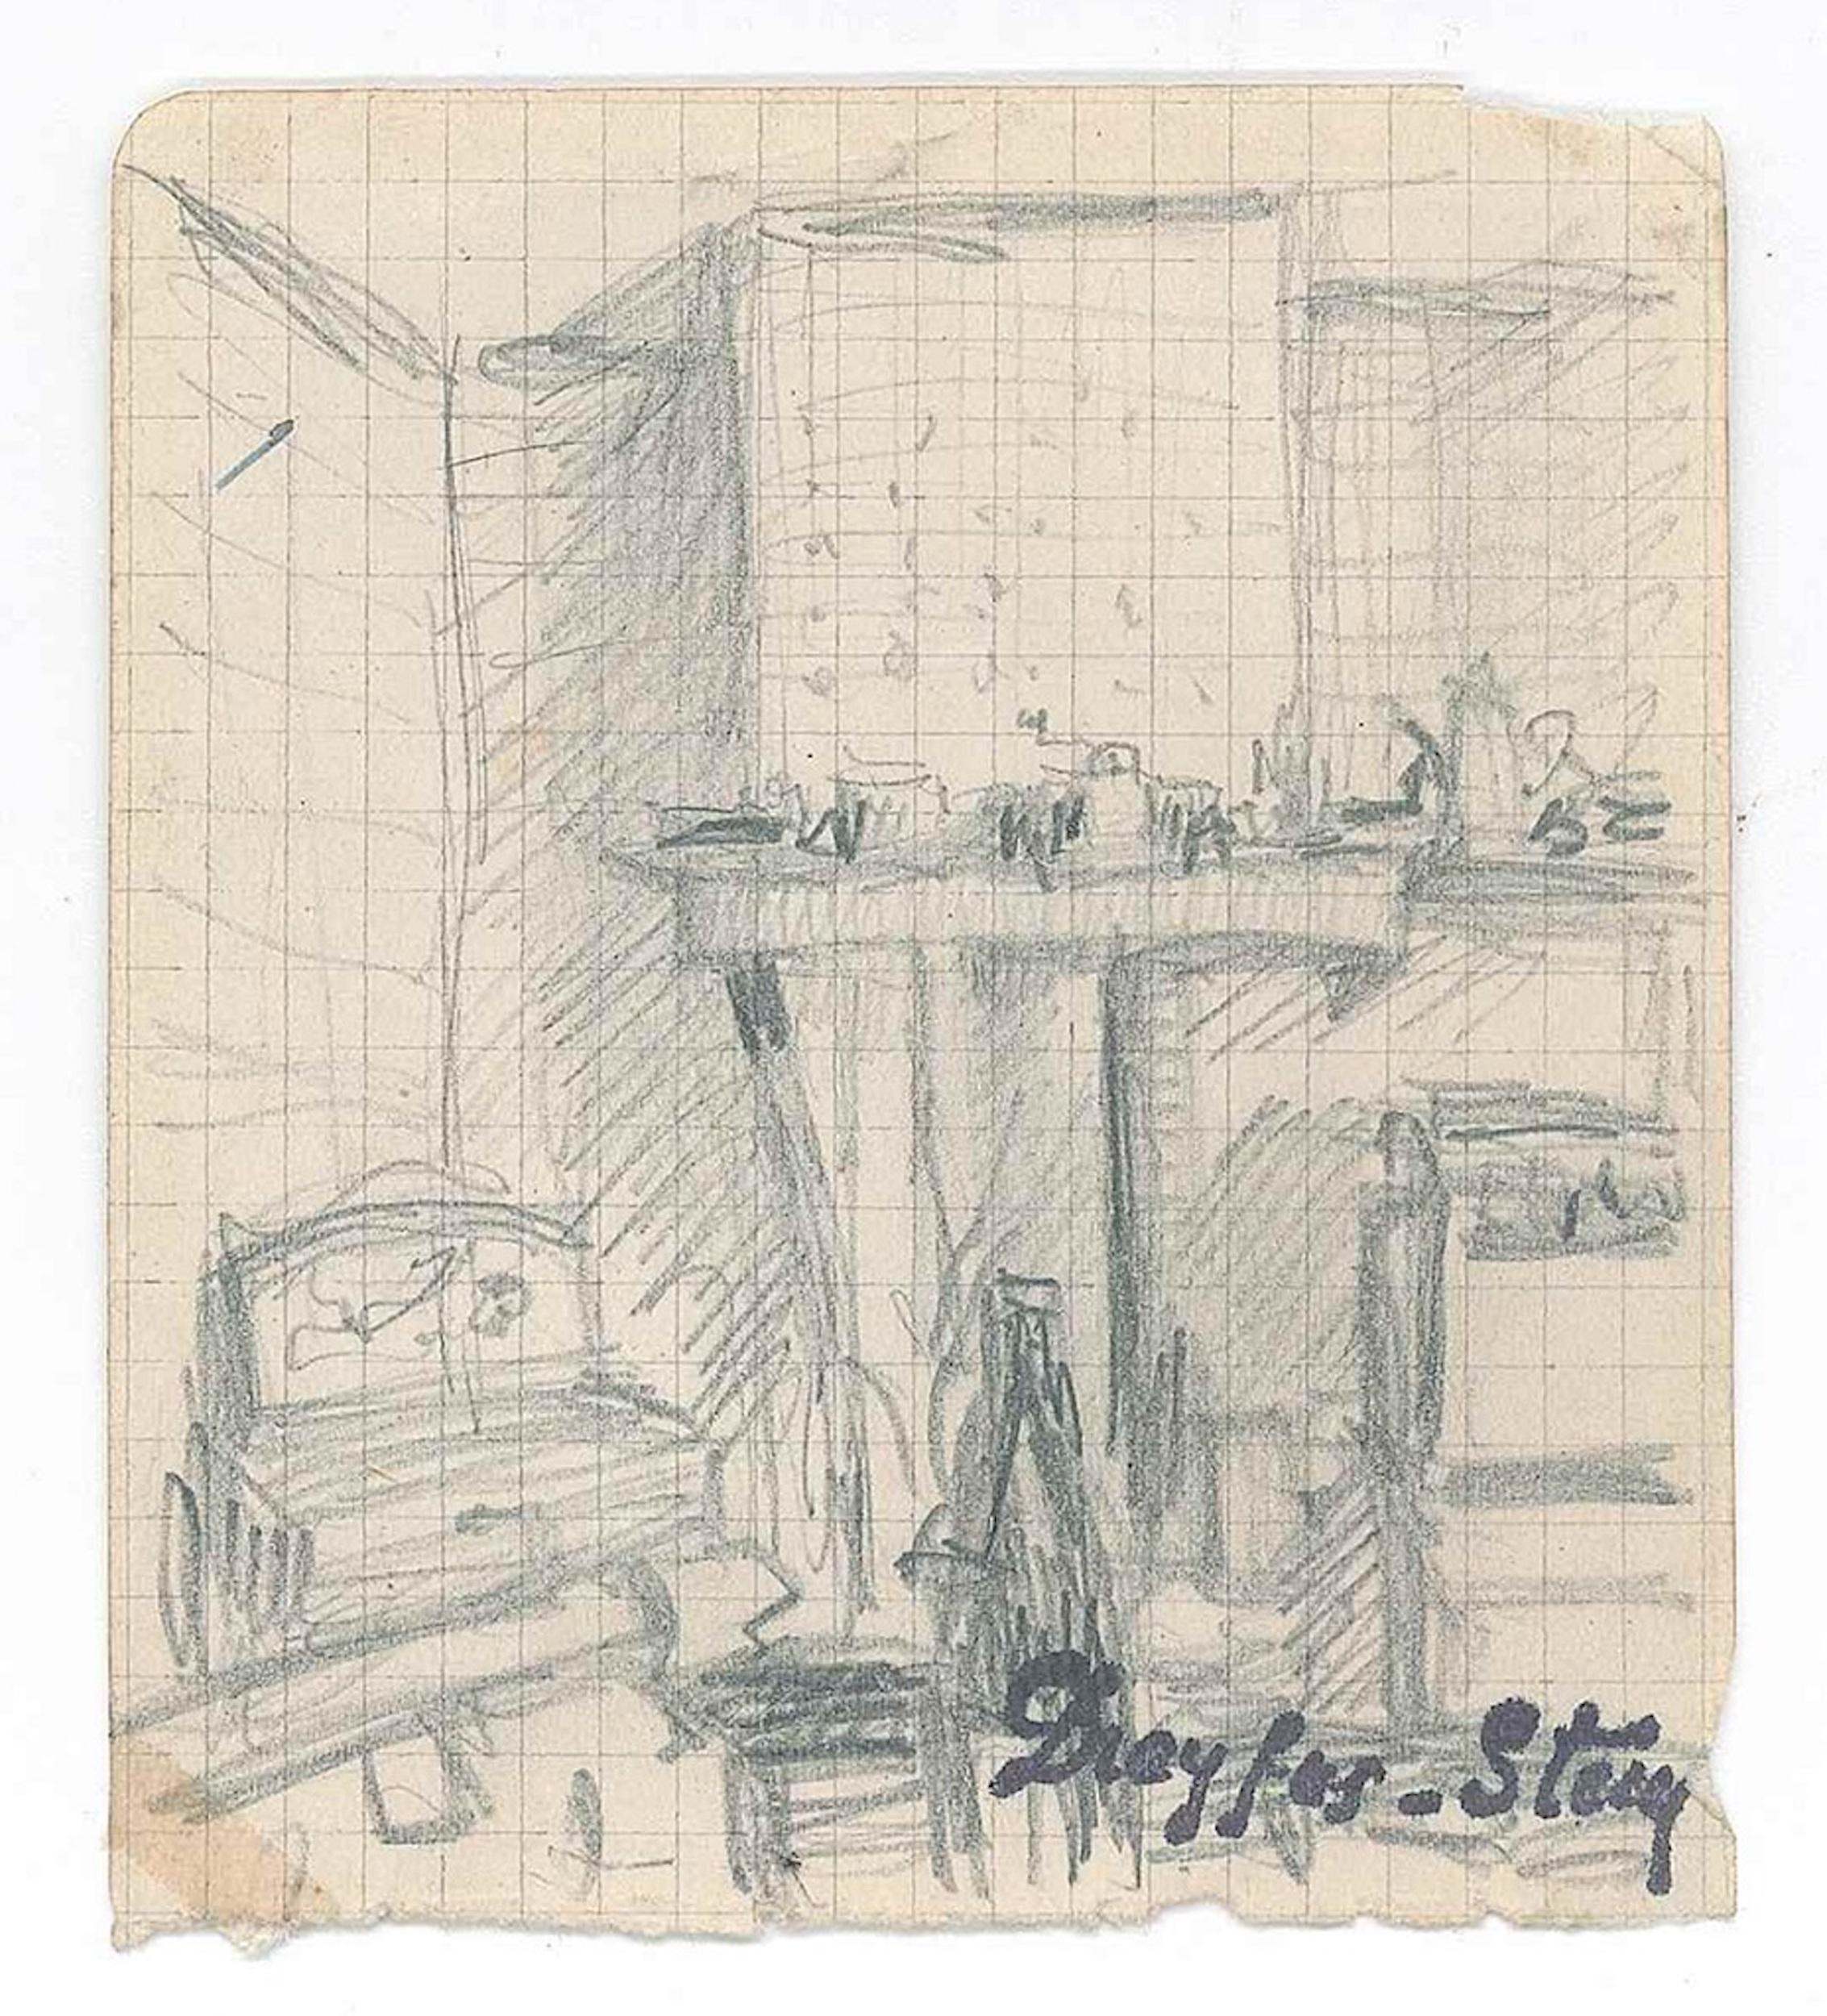 Small Sketch of Interiors - Pencil  Drawing by J. Dreyfus-Stern - 1920s